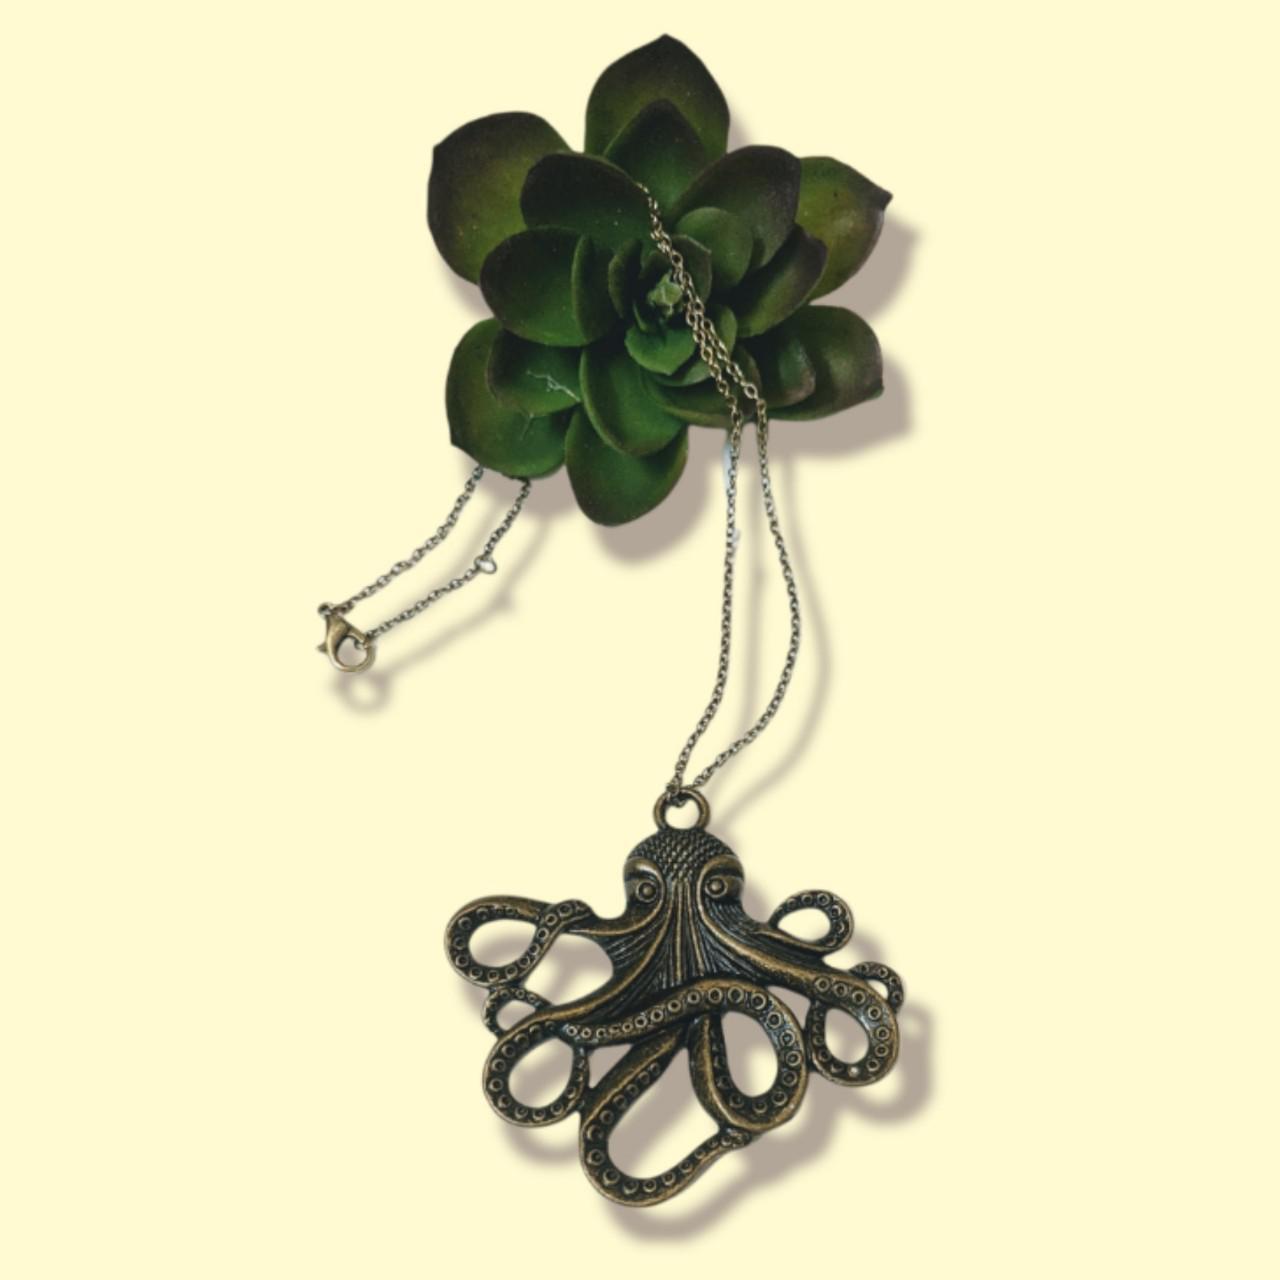 Product Image 3 - Steampunk octopus charm necklace can